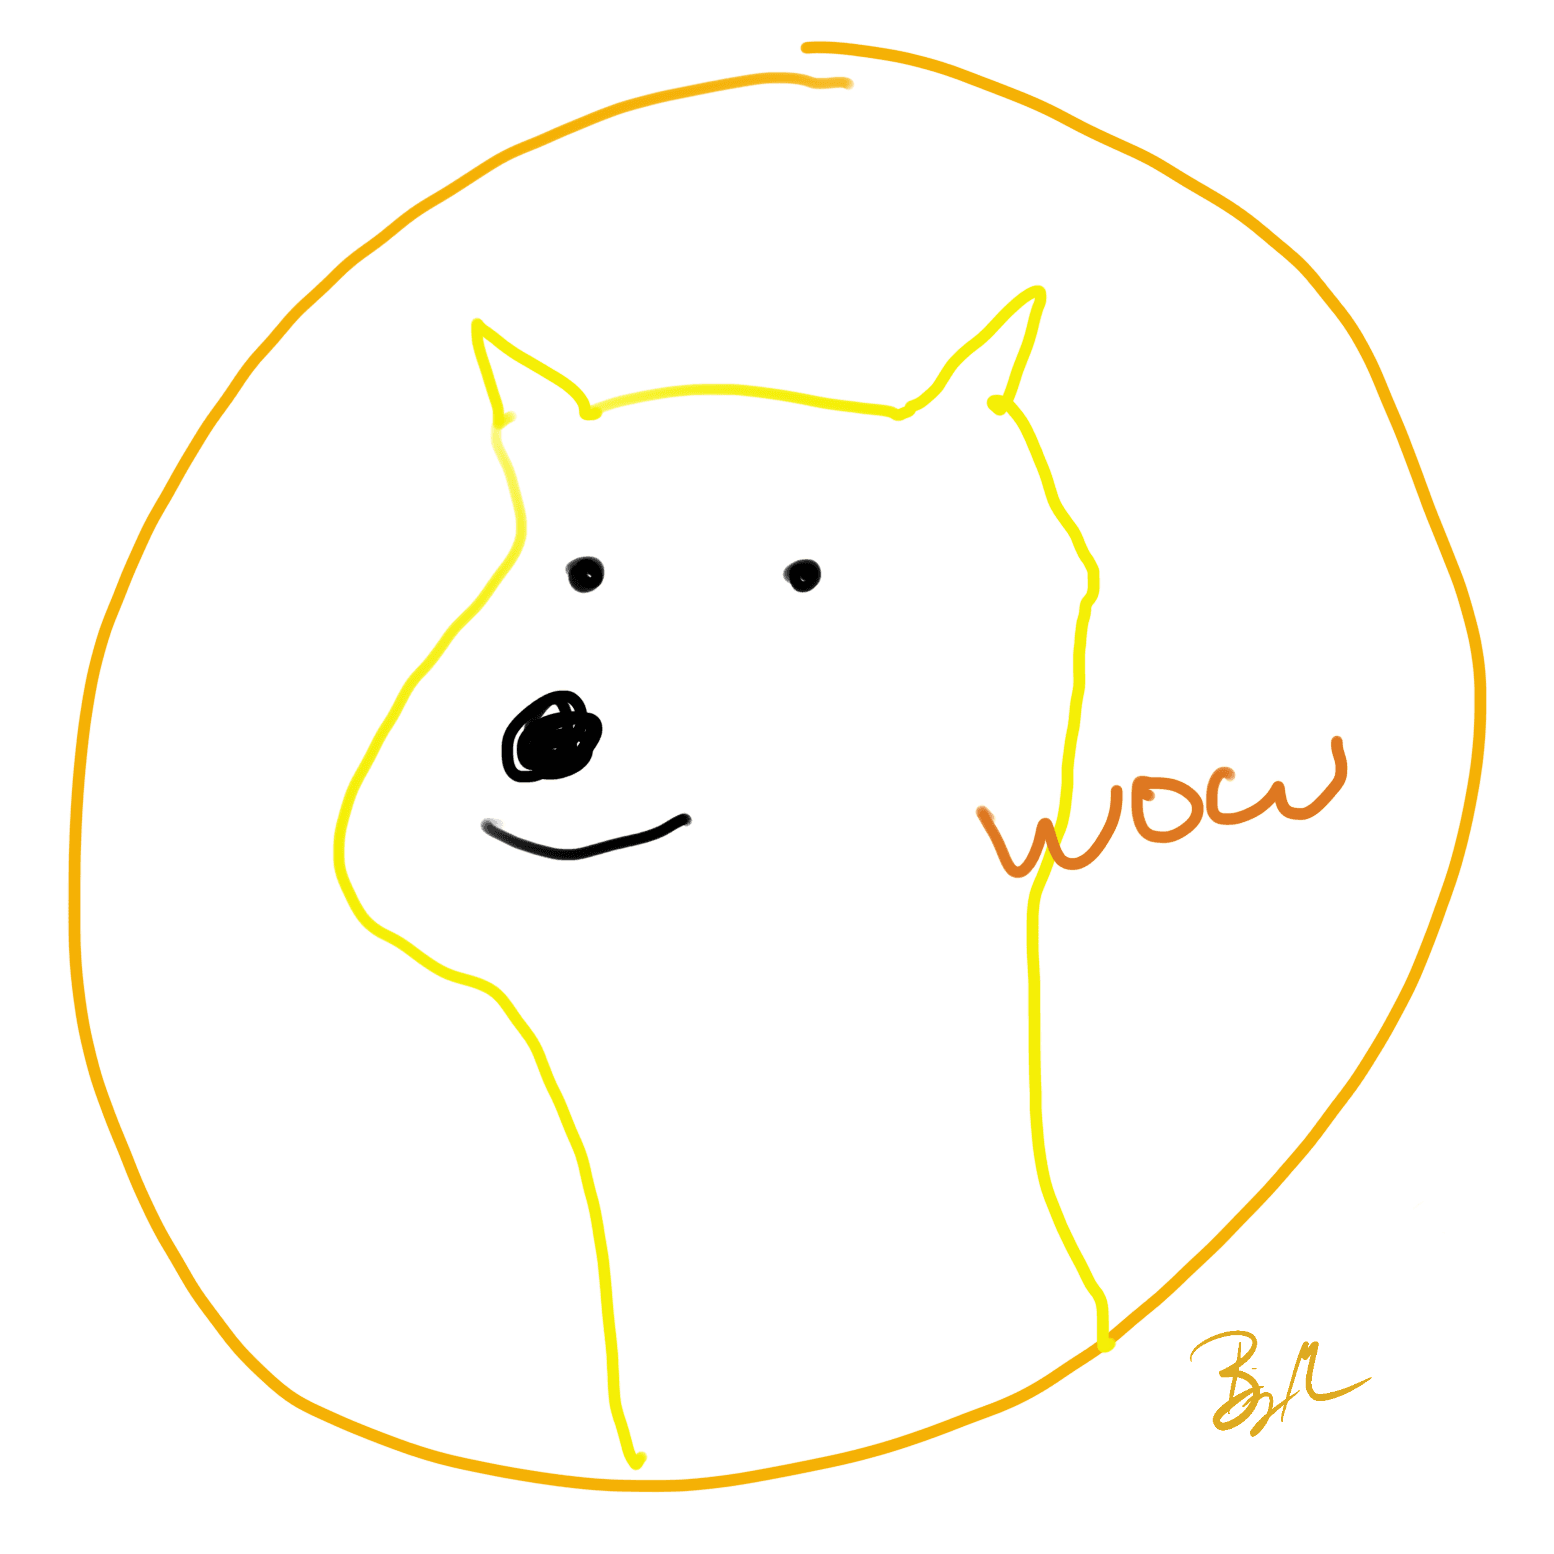 #1: Crappy Dogecoin Doodles: Dogecoin